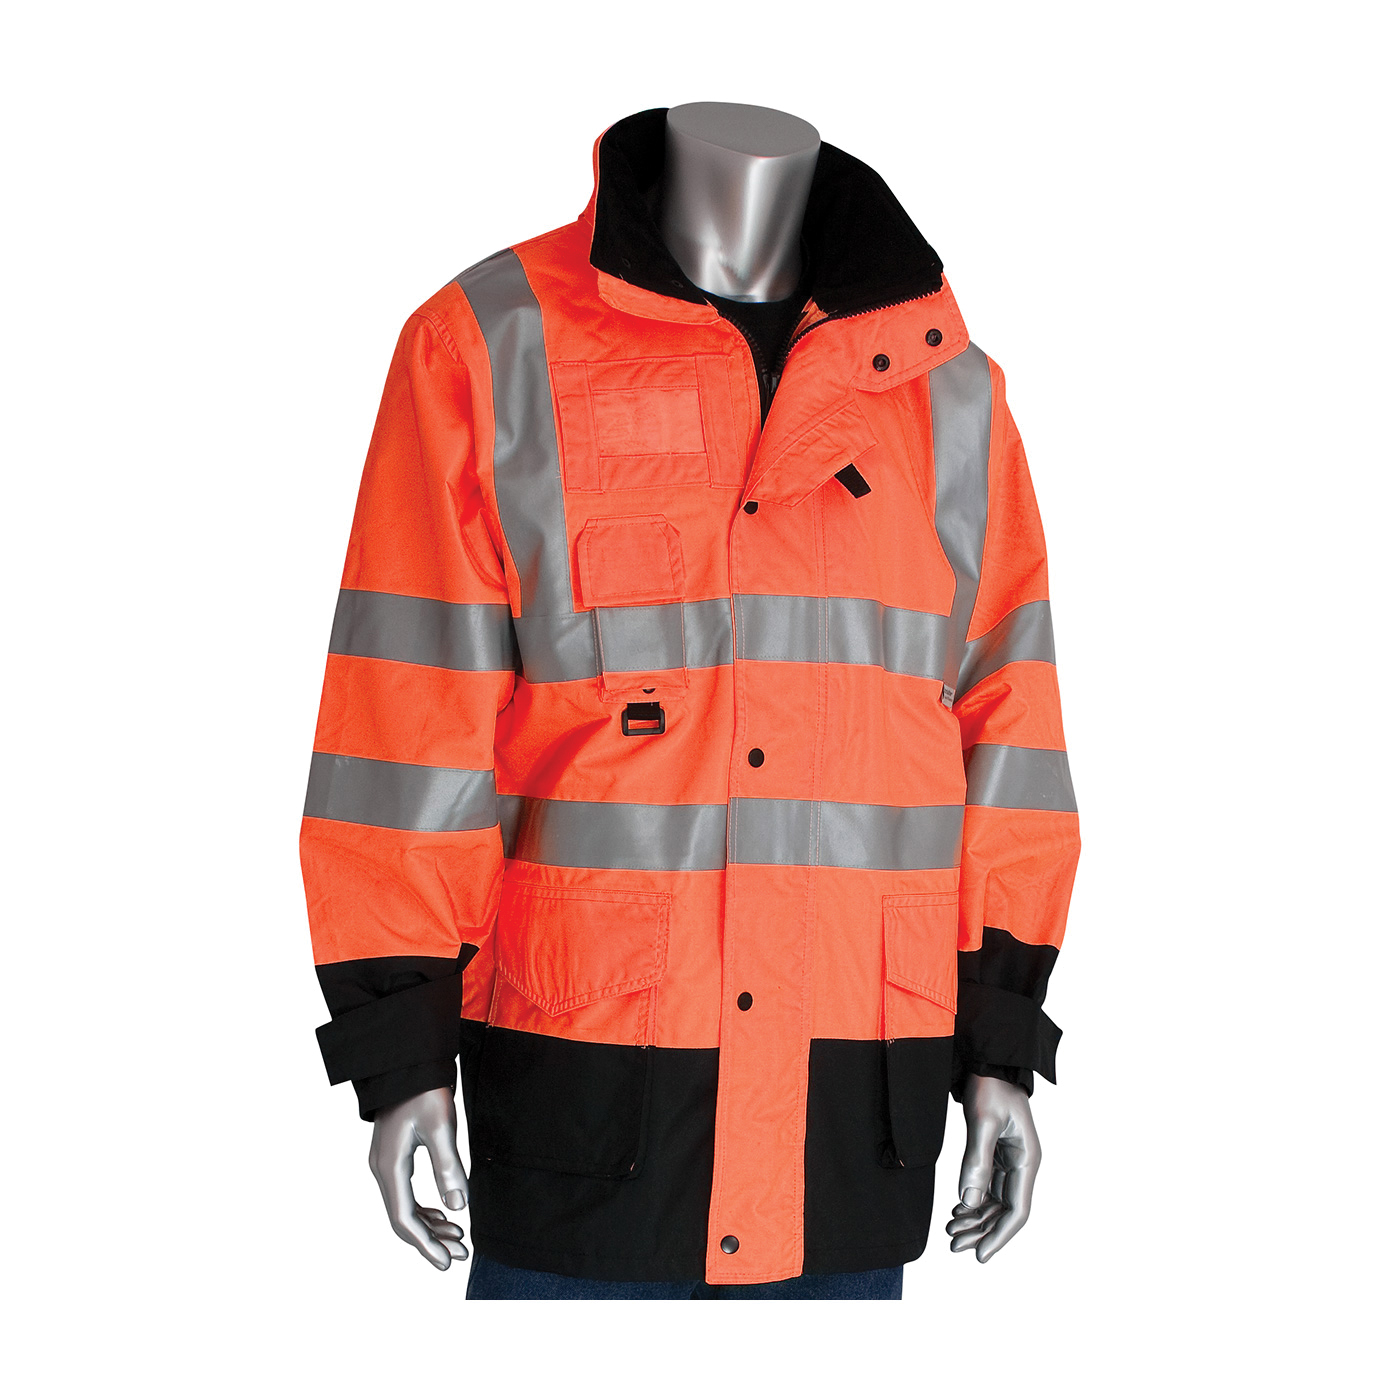 PIP® 343-1756-OR/L 7-in-1 All Condition Winter Coat With Inner Jacket and Vest Combination, Hi-Viz Orange, Polyester, 55-1/2 in Chest, Resists: Water, Specifications Met: ANSI 107 Class 3 Type R